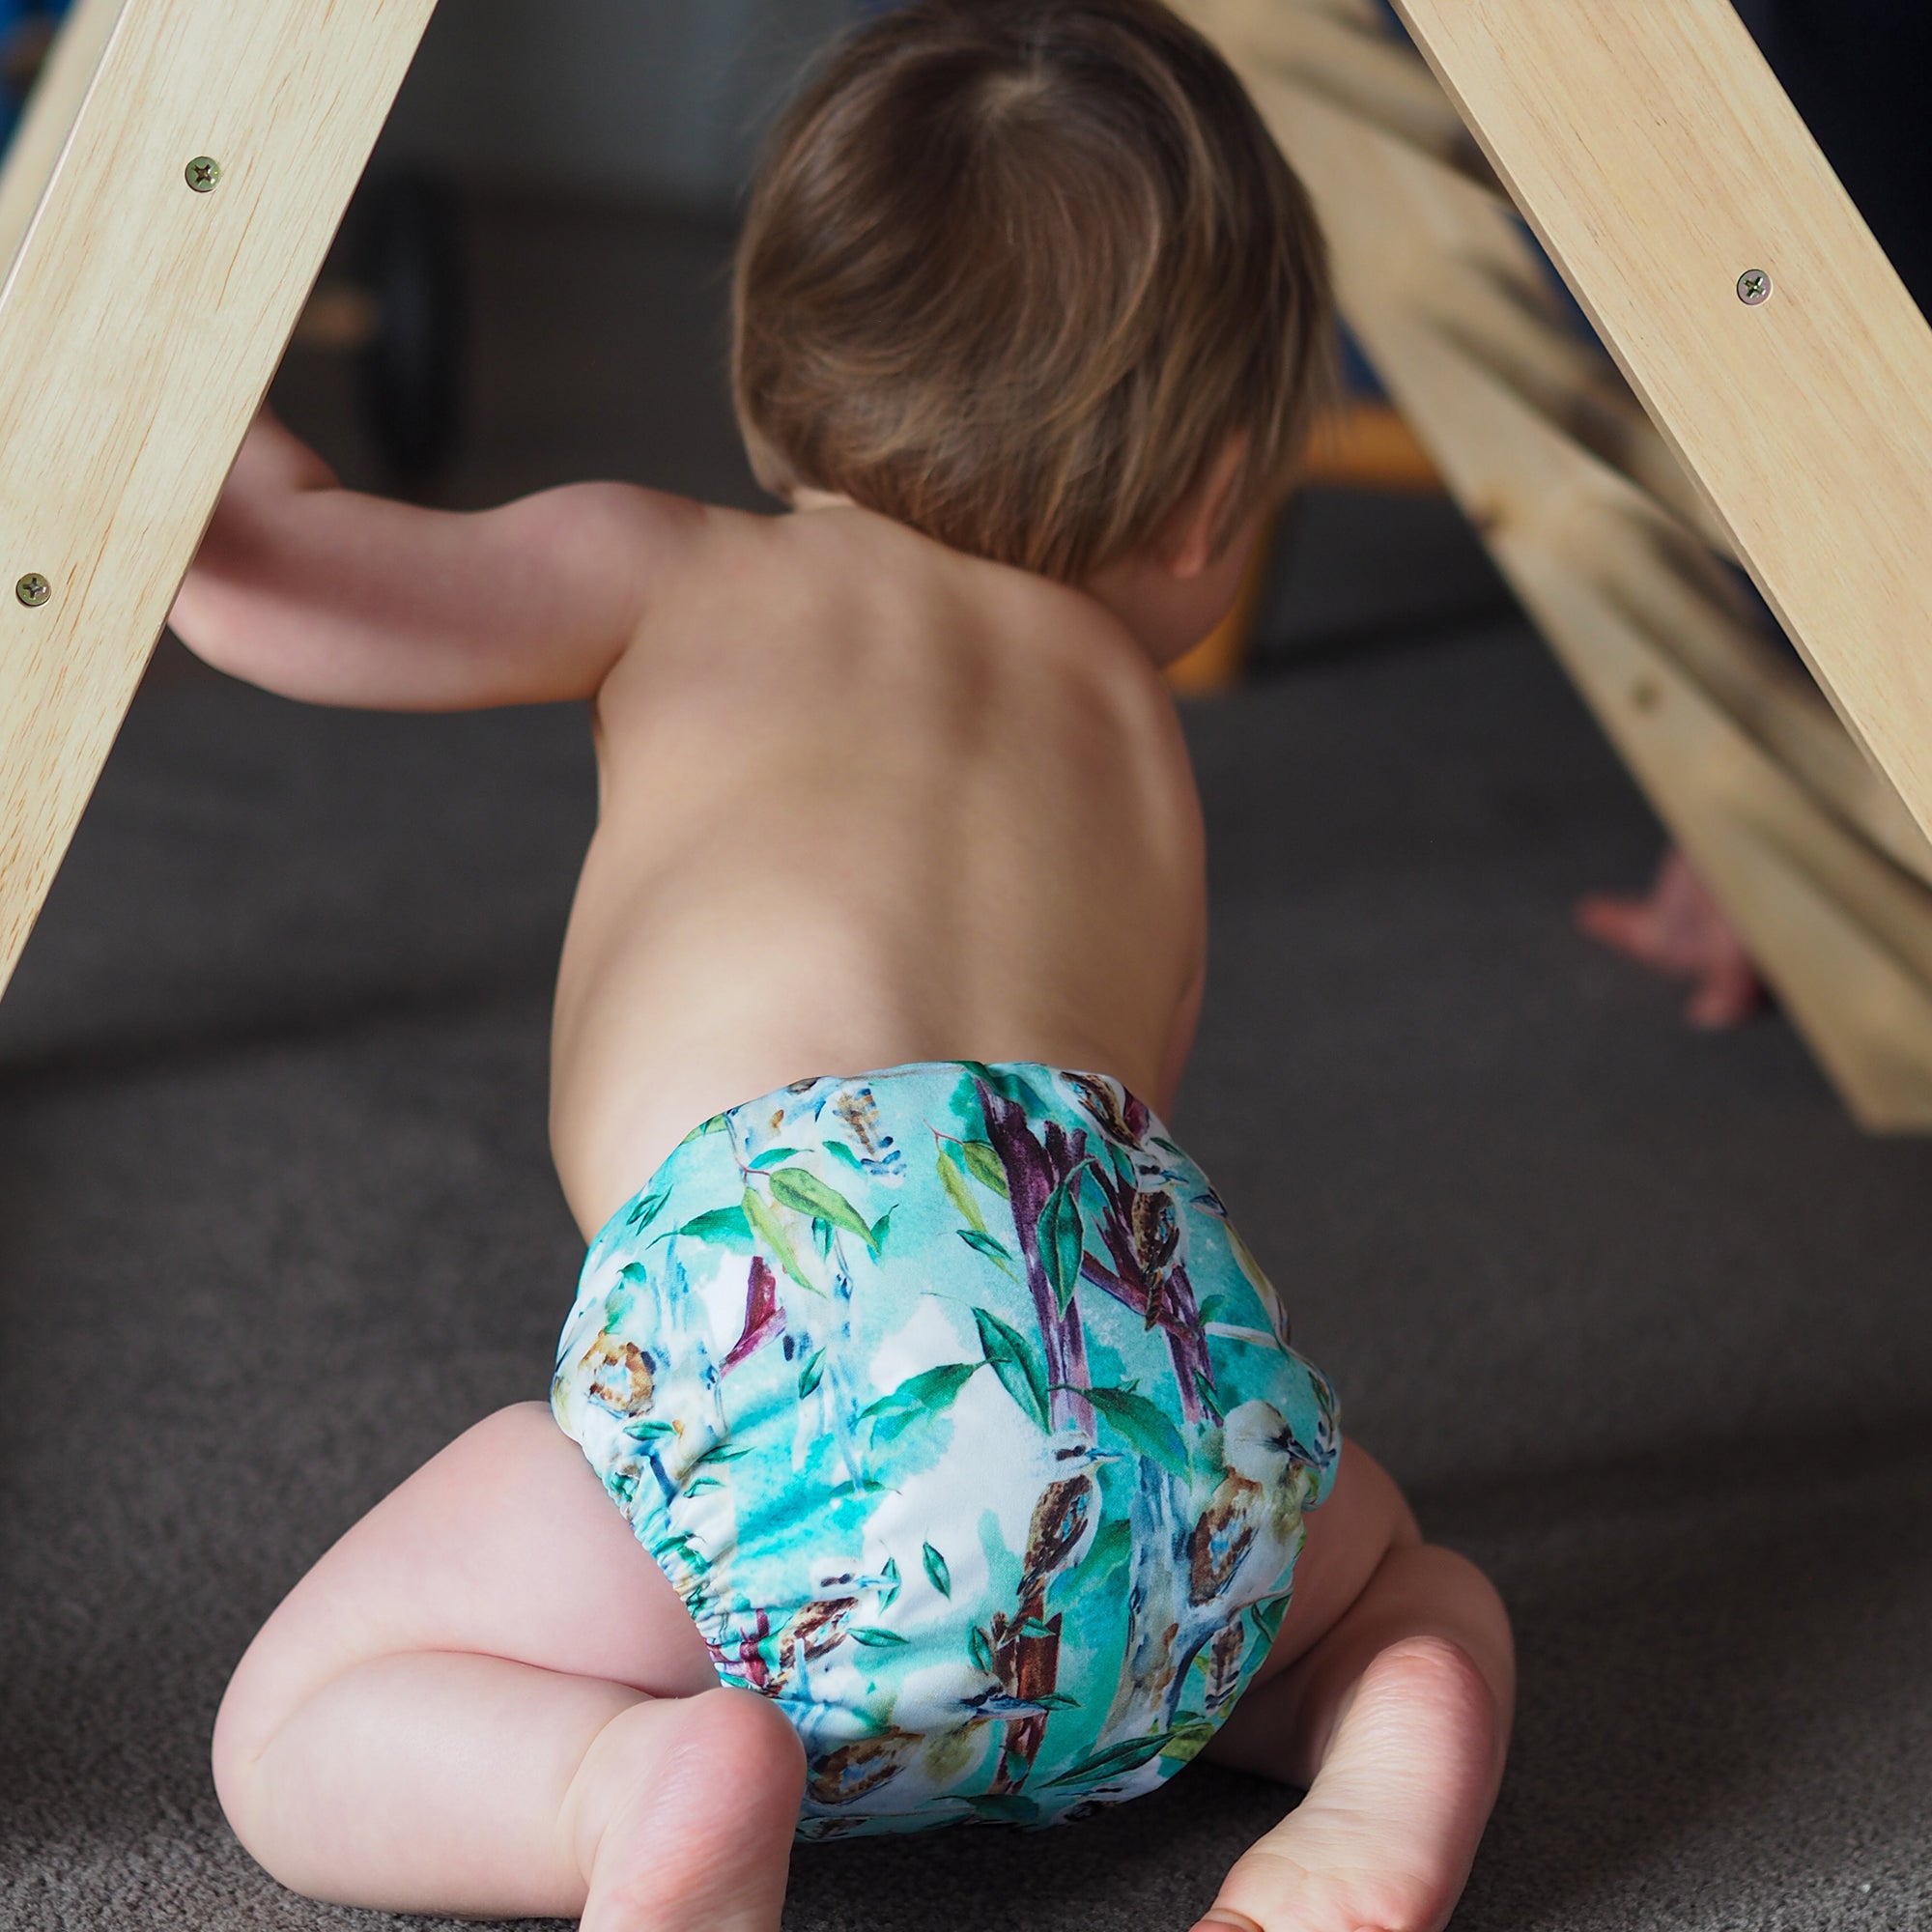 Mighty Booster by Baby Beehinds  Bamboo Inserts for Modern Cloth nappies &  Night Nappies